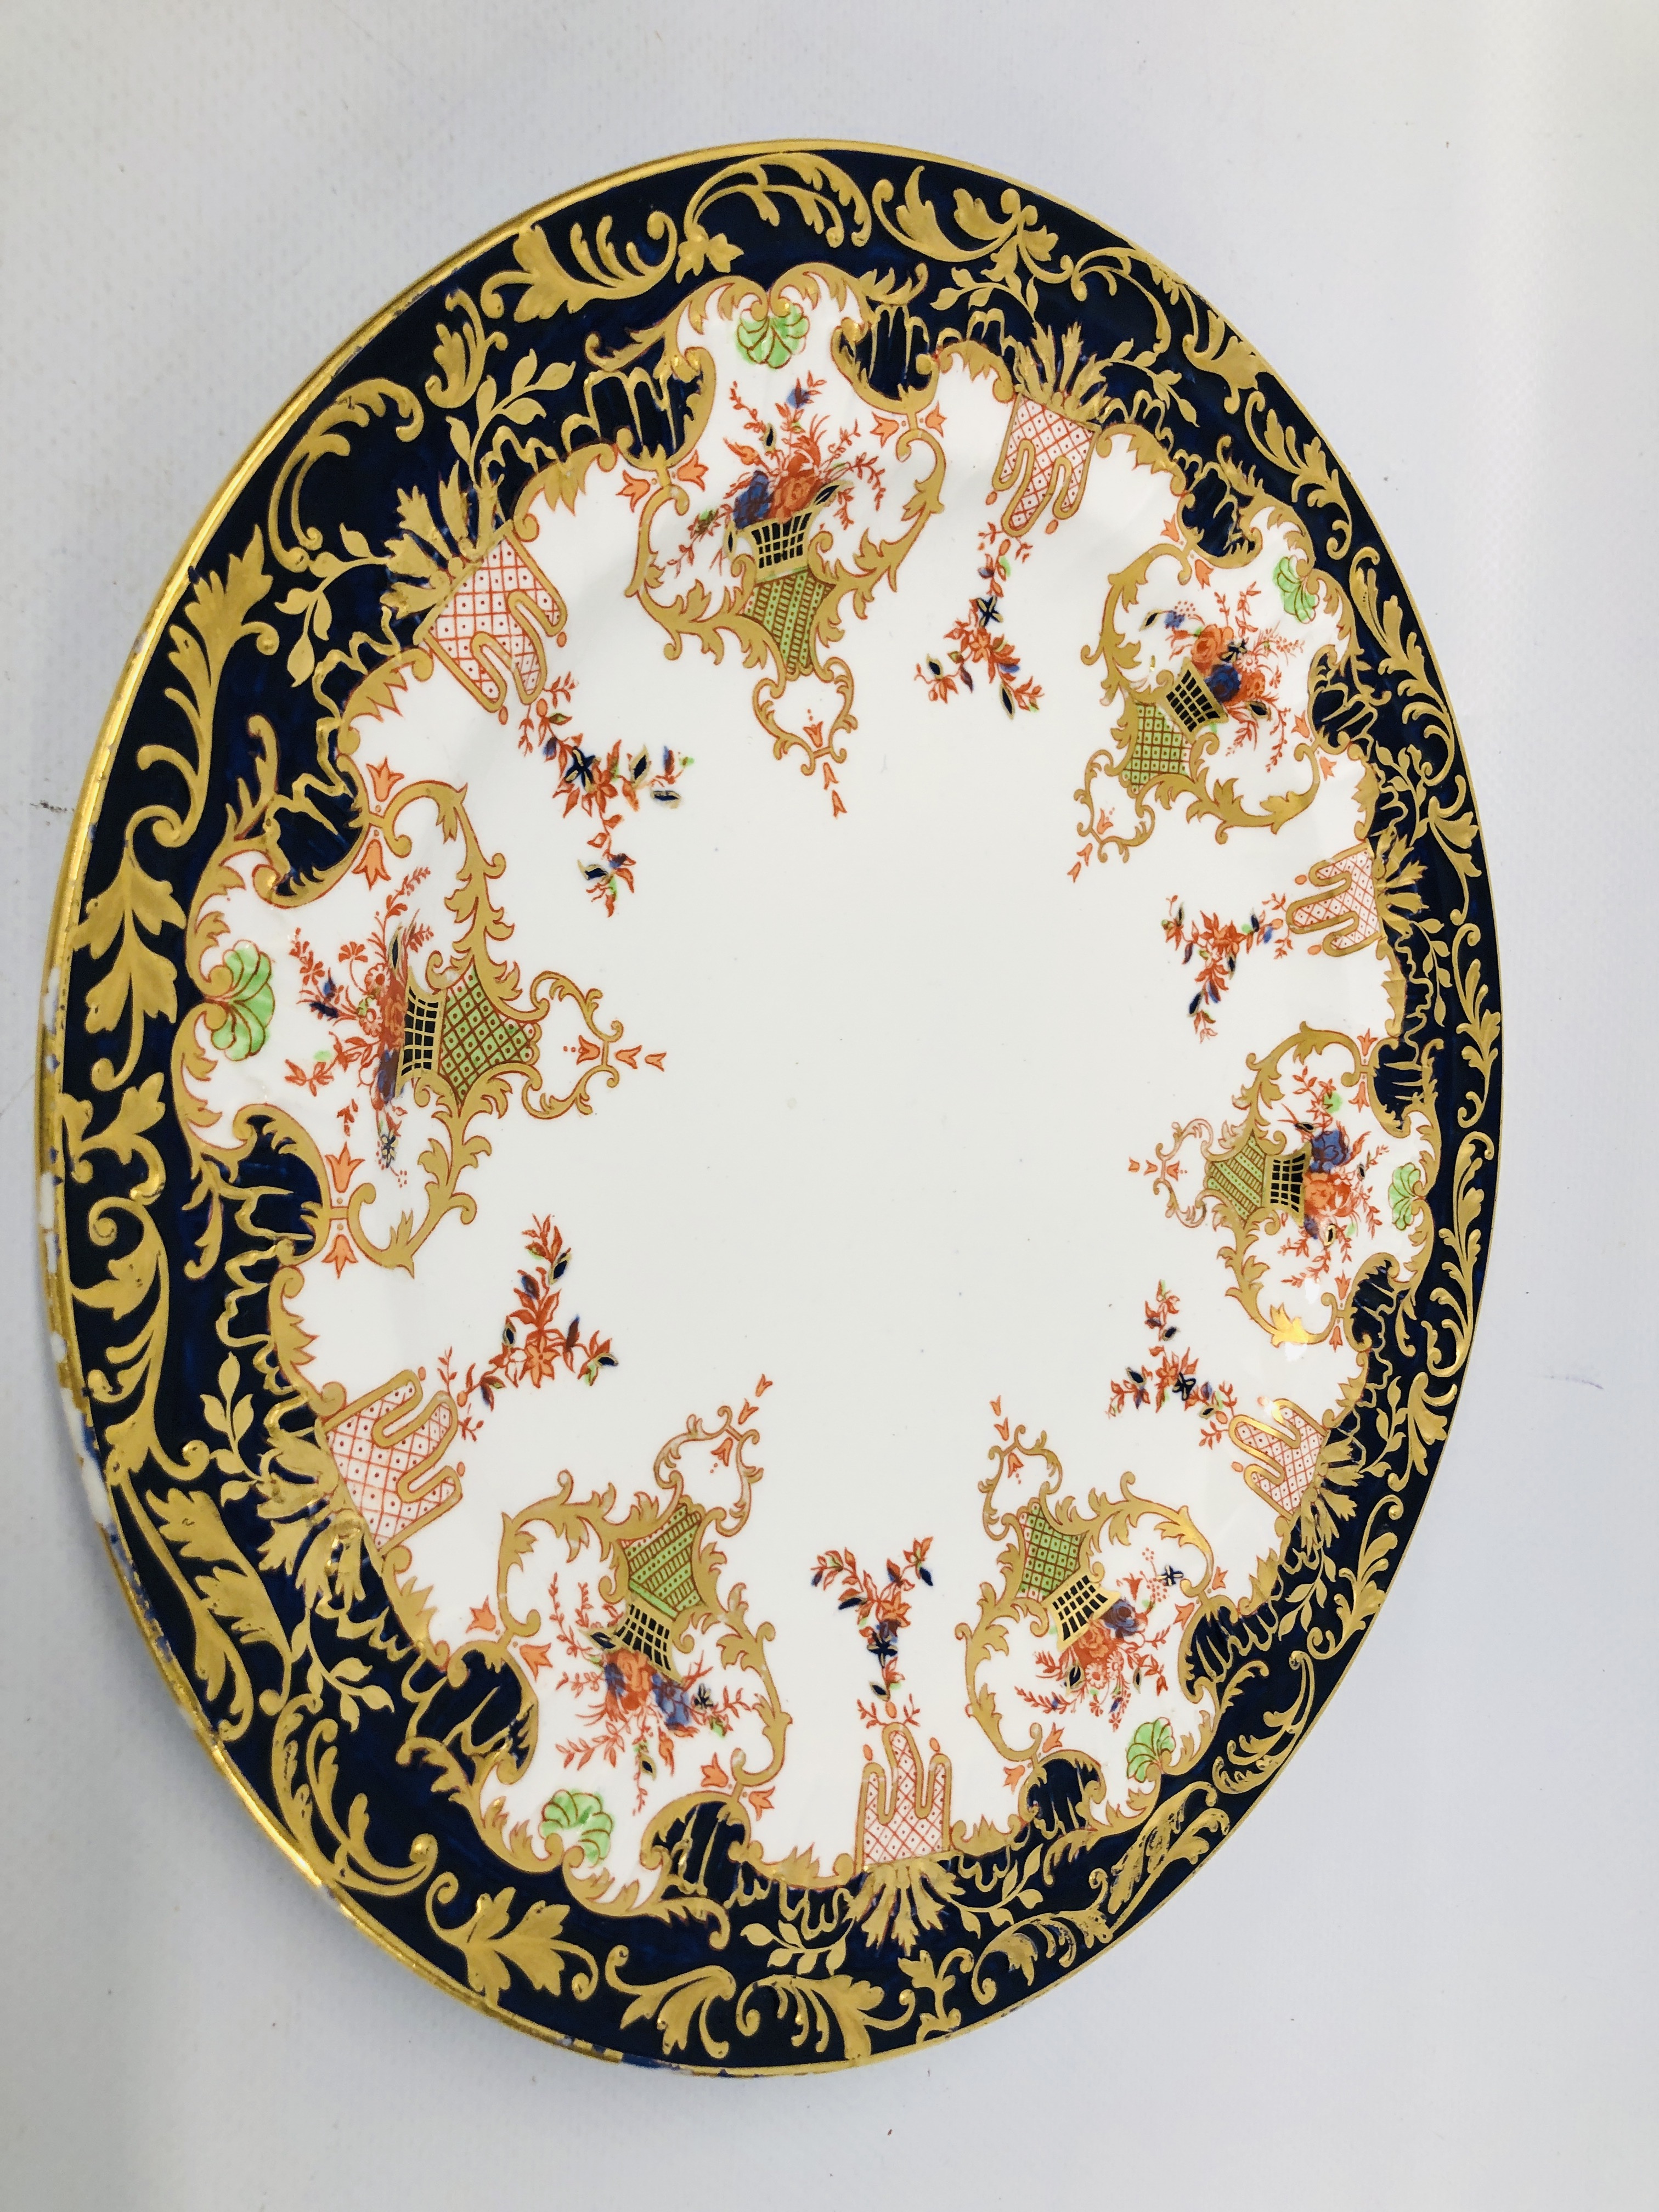 COLLECTION OF PERIOD PLATES TO INCLUDE A SET OF 4 HANDPAINTED FLORAL PATTERN PLATES "3090", - Image 2 of 17